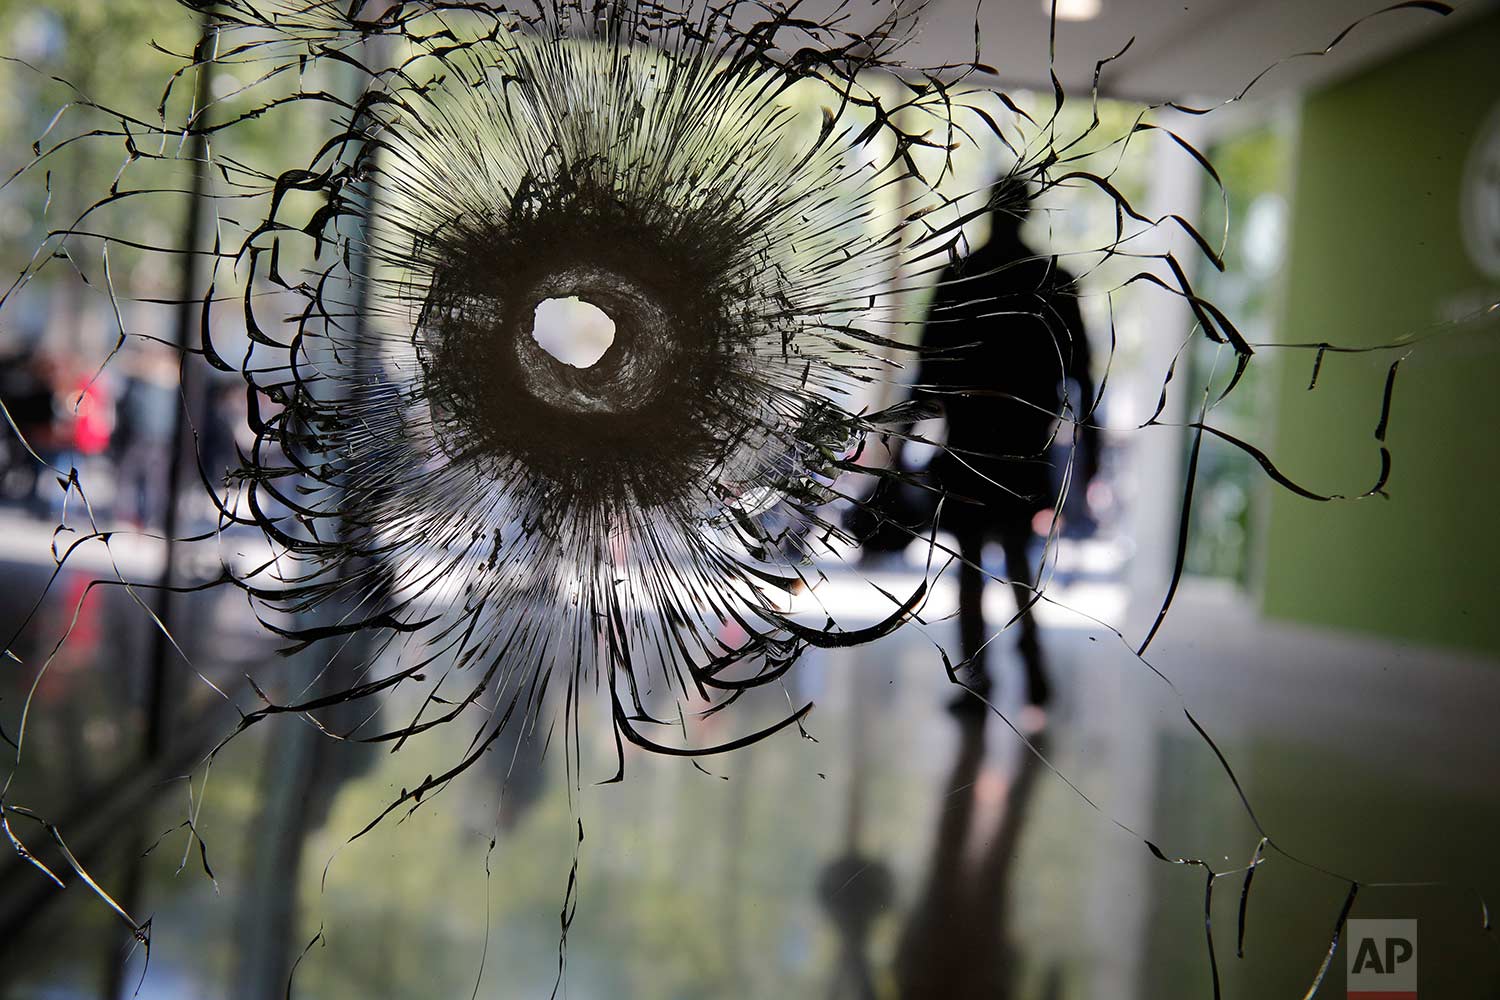  In this Friday, April 21, 2017 photo, a bullet hole is pictured on a shopwindow of the Champs Elysees boulevard in Paris. France began picking itself up Friday from another deadly shooting claimed by the Islamic State group, with President Francois 